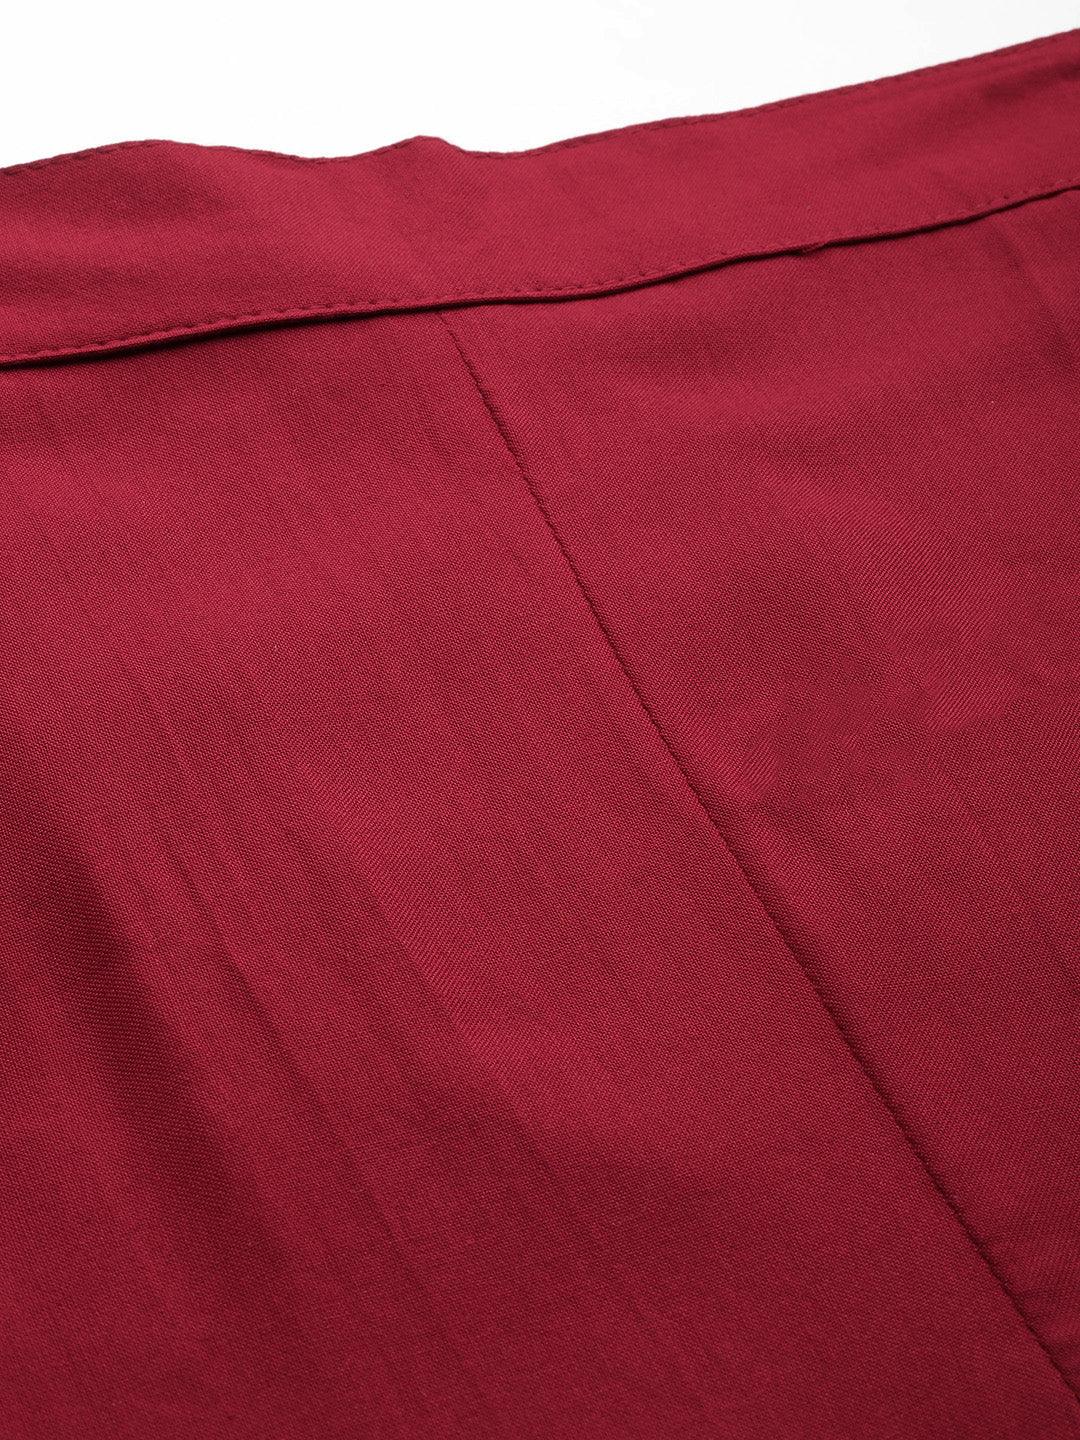 Maroon Solid Rayon Trousers - Libas